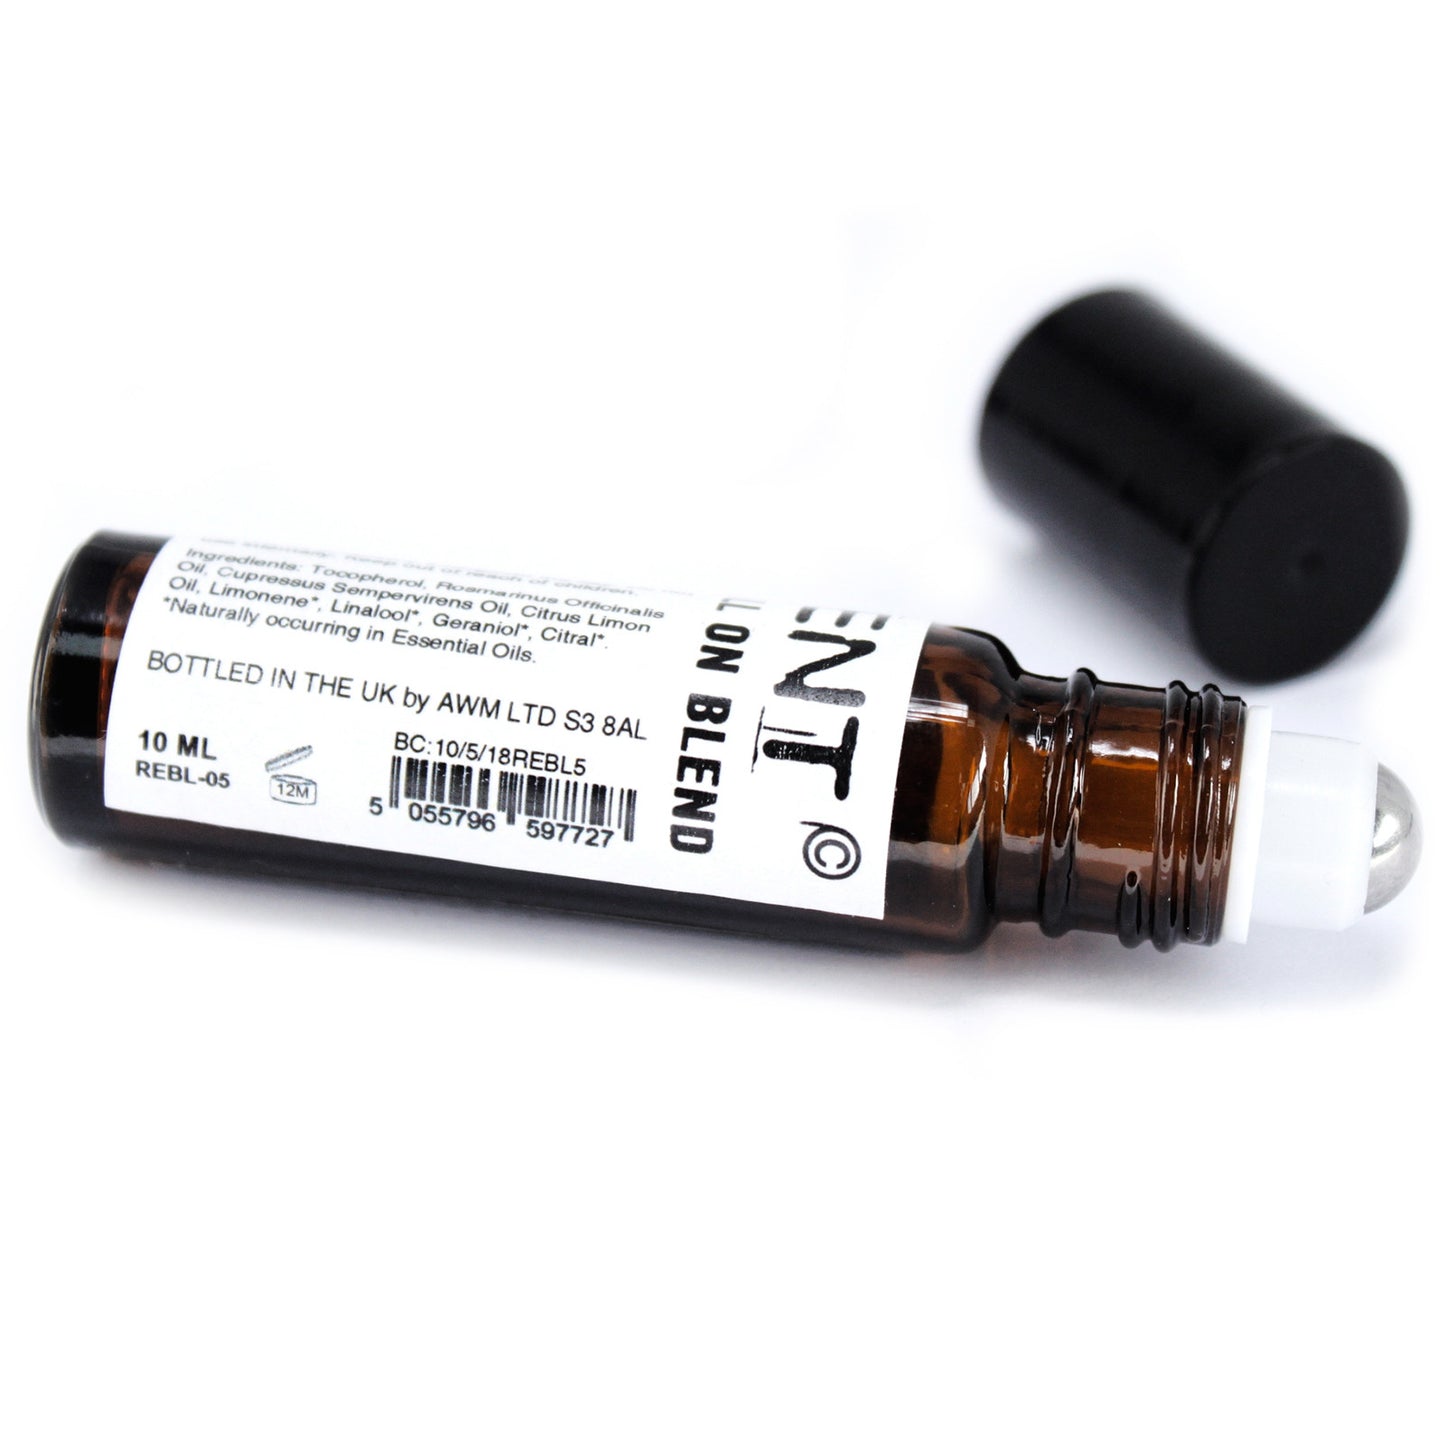 10ml Roll On Essential Oil Blend - Just Focus!